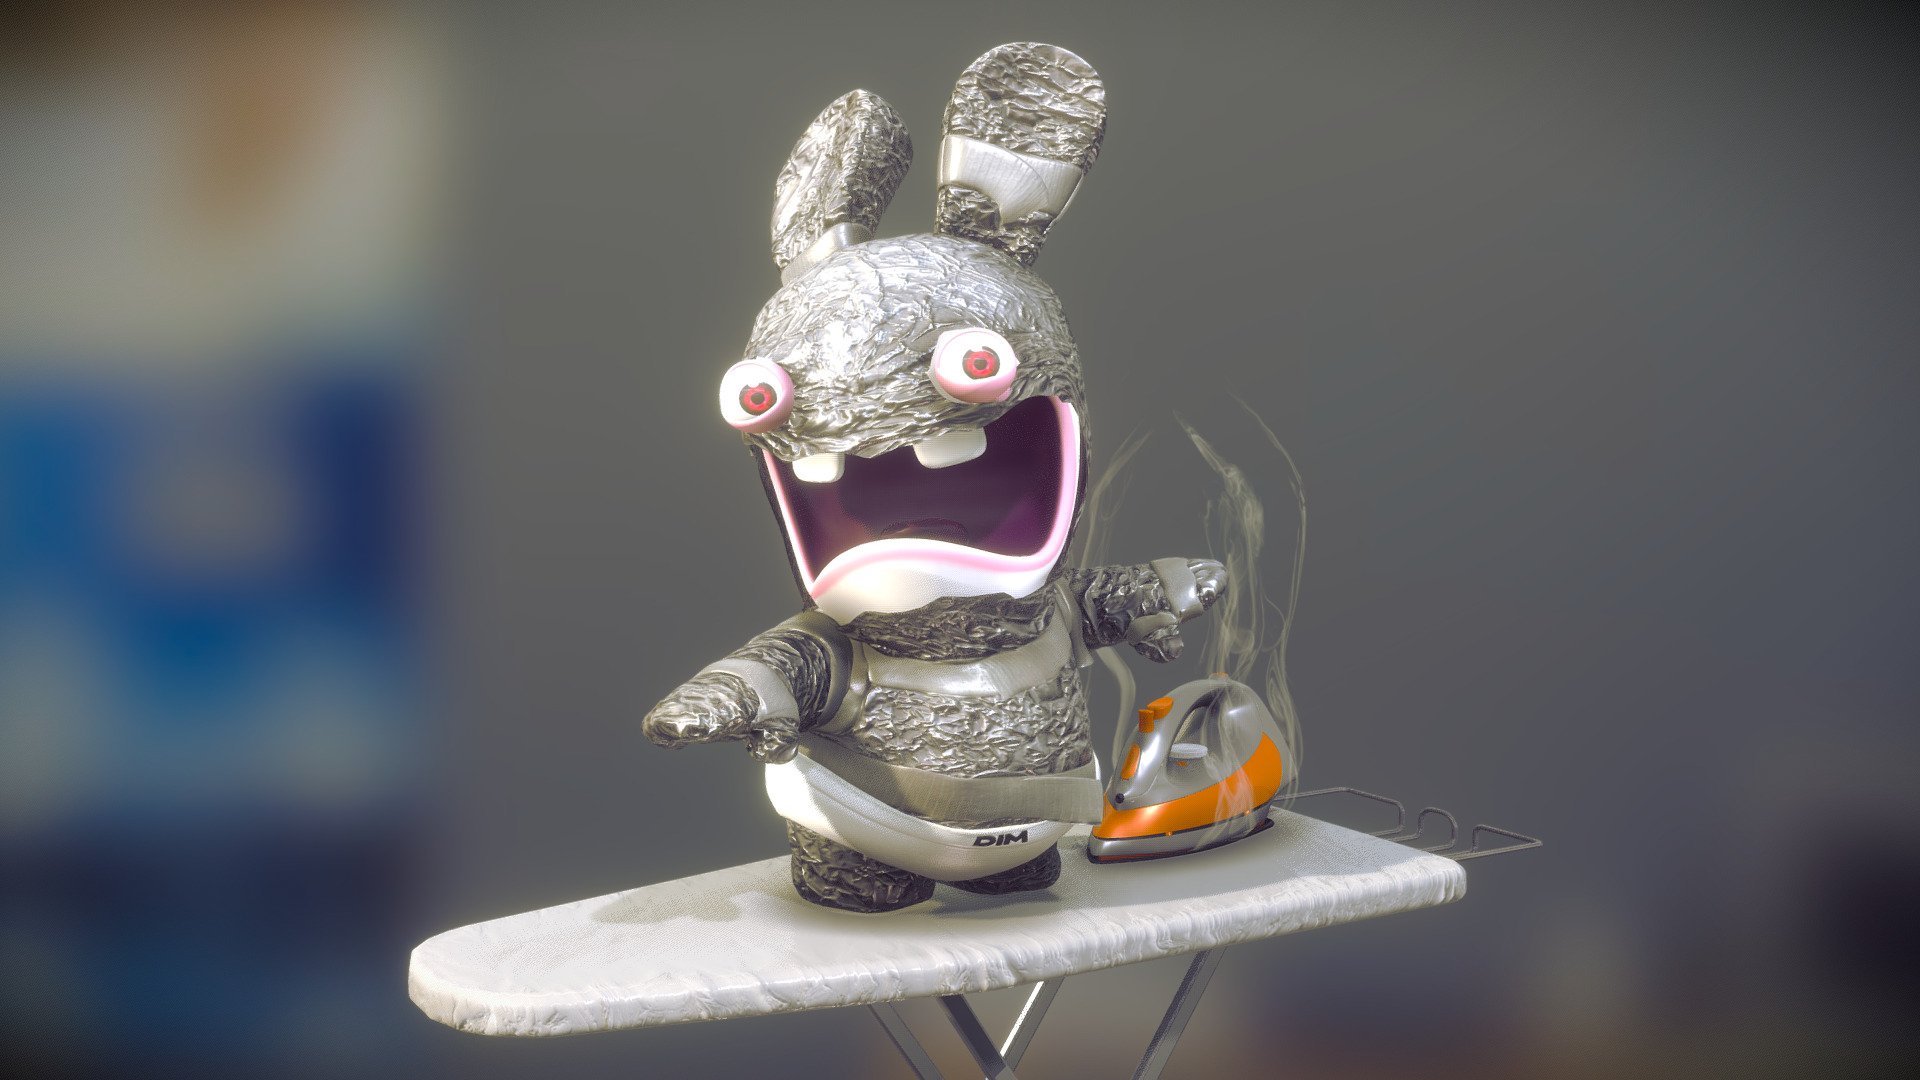 Behold the Silver Surfer !!! Hmm, not quite. Actually.

Such what happens when a raving rabbid try to become a super hero : 
Another (costume) disaster !

Concept art : made with Photoshop
Modeling : 3DS Max
Texturing : Photoshop

The raving rabbids belong to Ubisoft 3d model